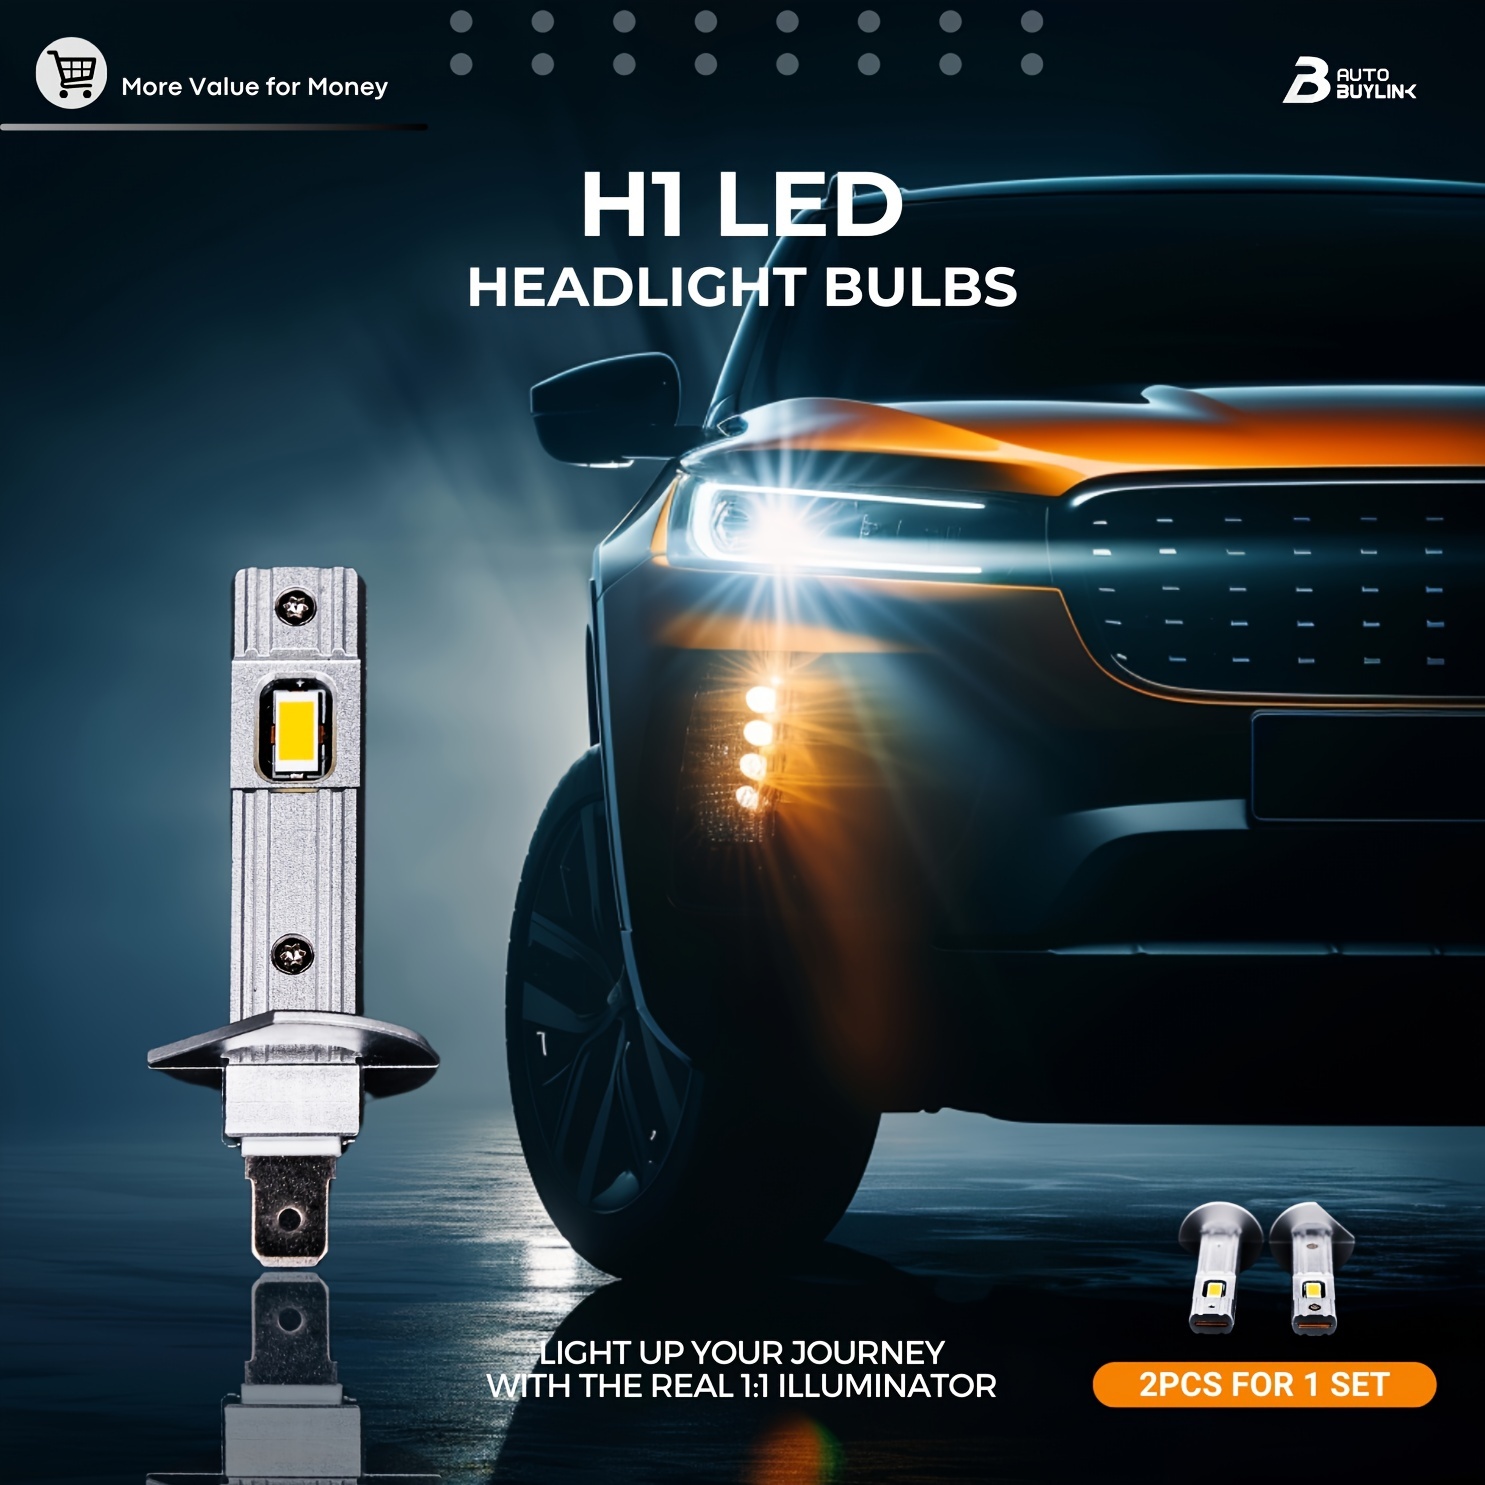 

2024 Upgraded H1 Led Headlight Bulbs 2pcs 1:1 Halogen Size With High Efficiency Cooling System 300% Brighter 6000k Cool White Direct Replacement No Adapter Required Plug & Play